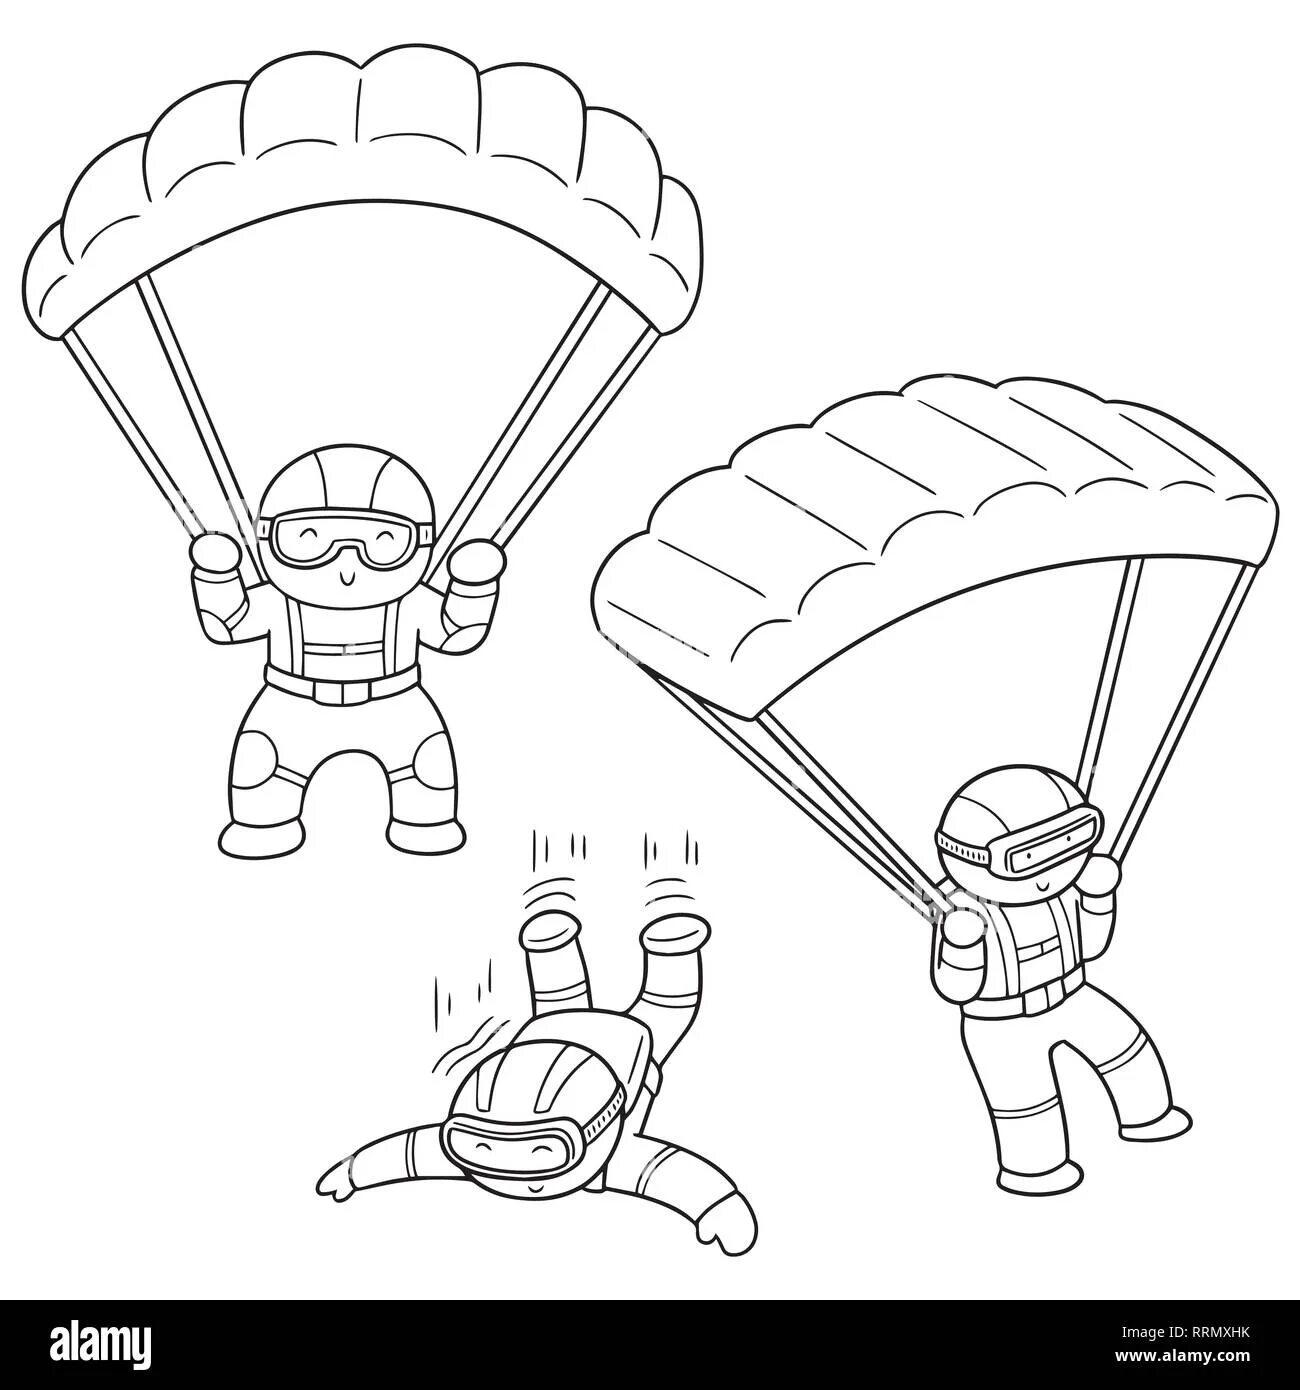 Glorious skydiver coloring page